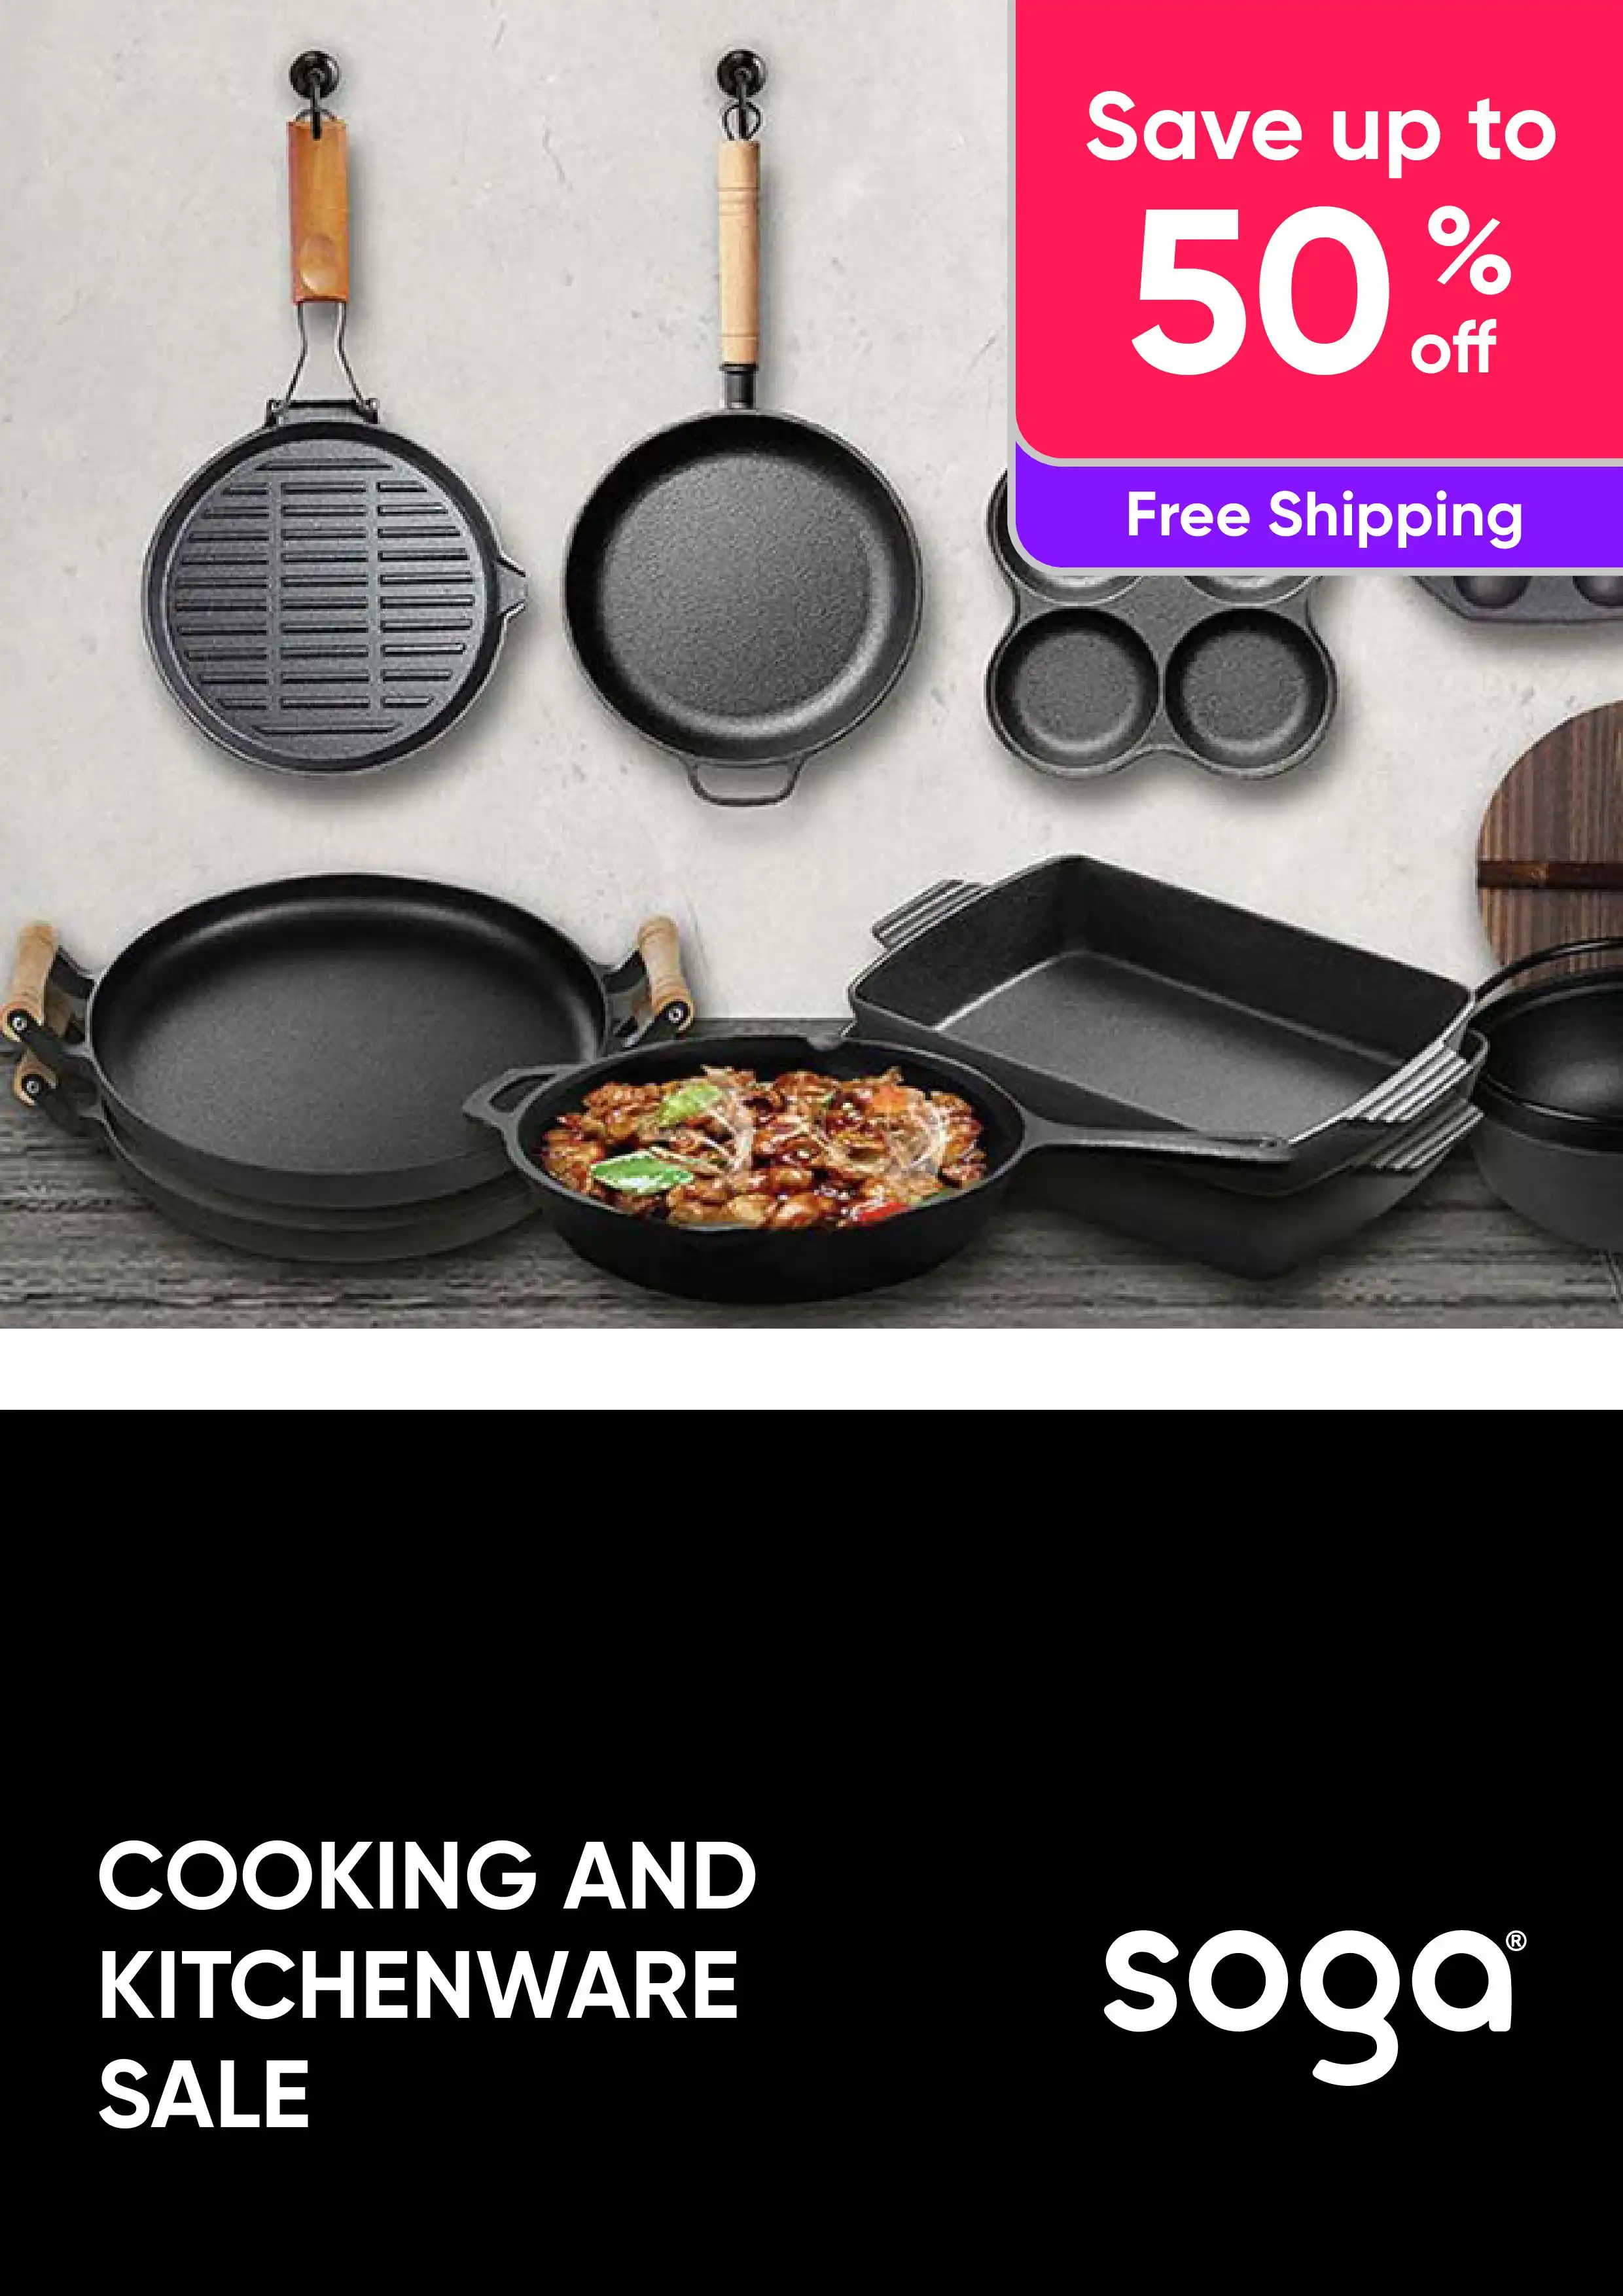 Cooking and Kitchenware Sale - Save Up To 50% Off + Free Shipping